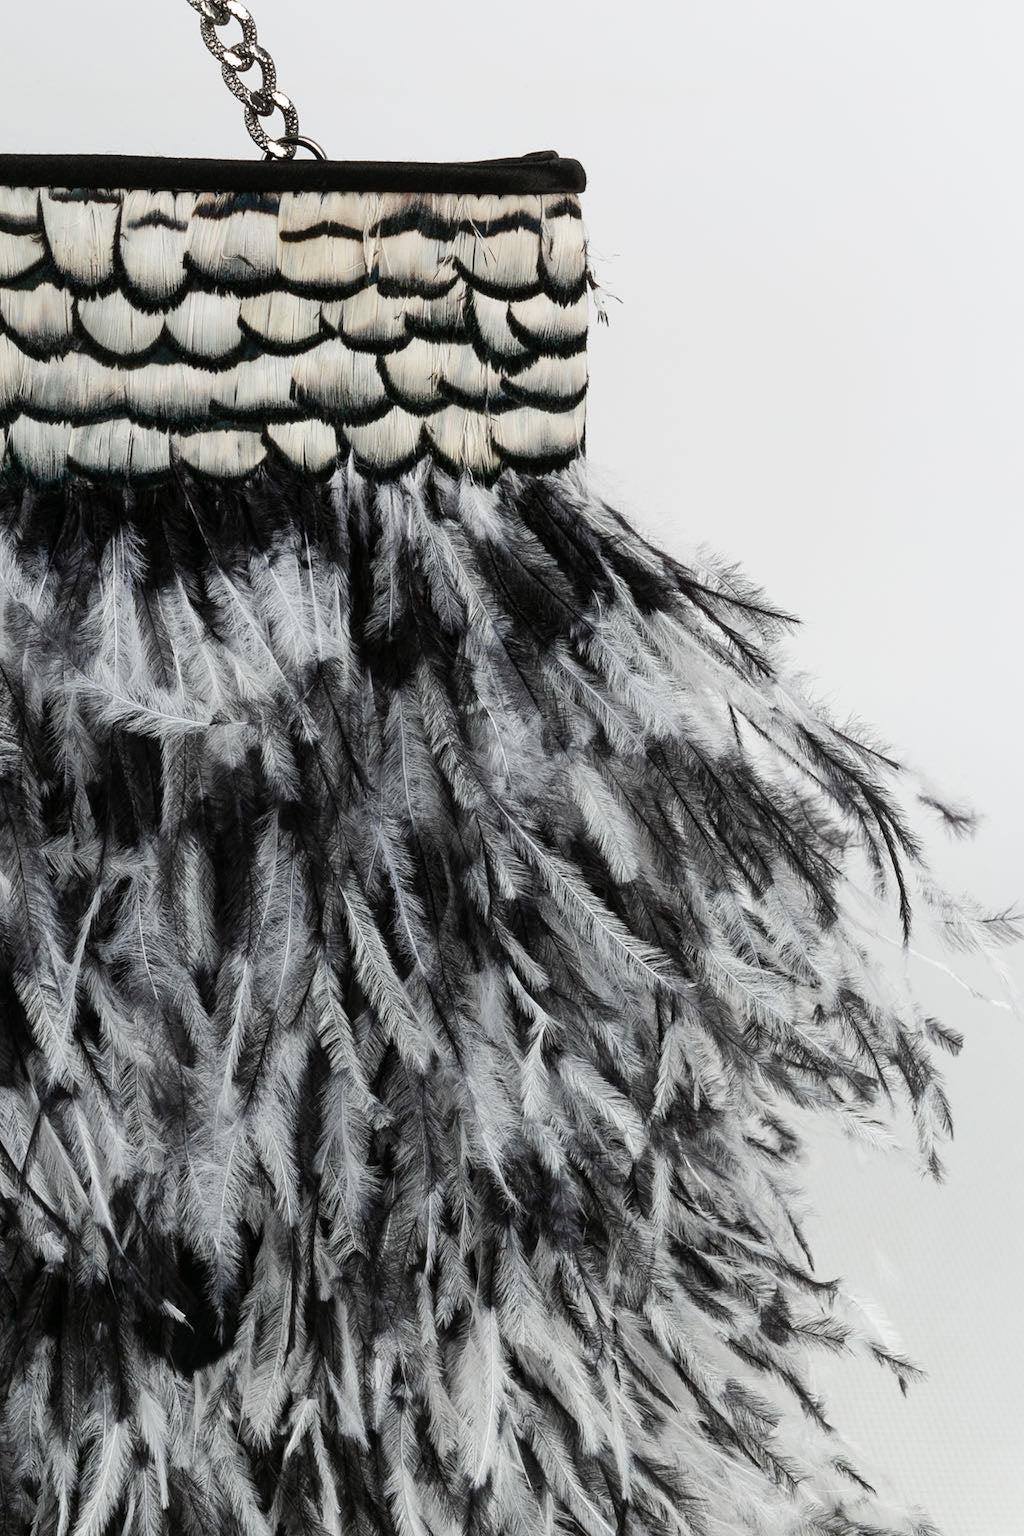 Chanel Clutch Silk Bag in Black and White Feathers, 2011 5